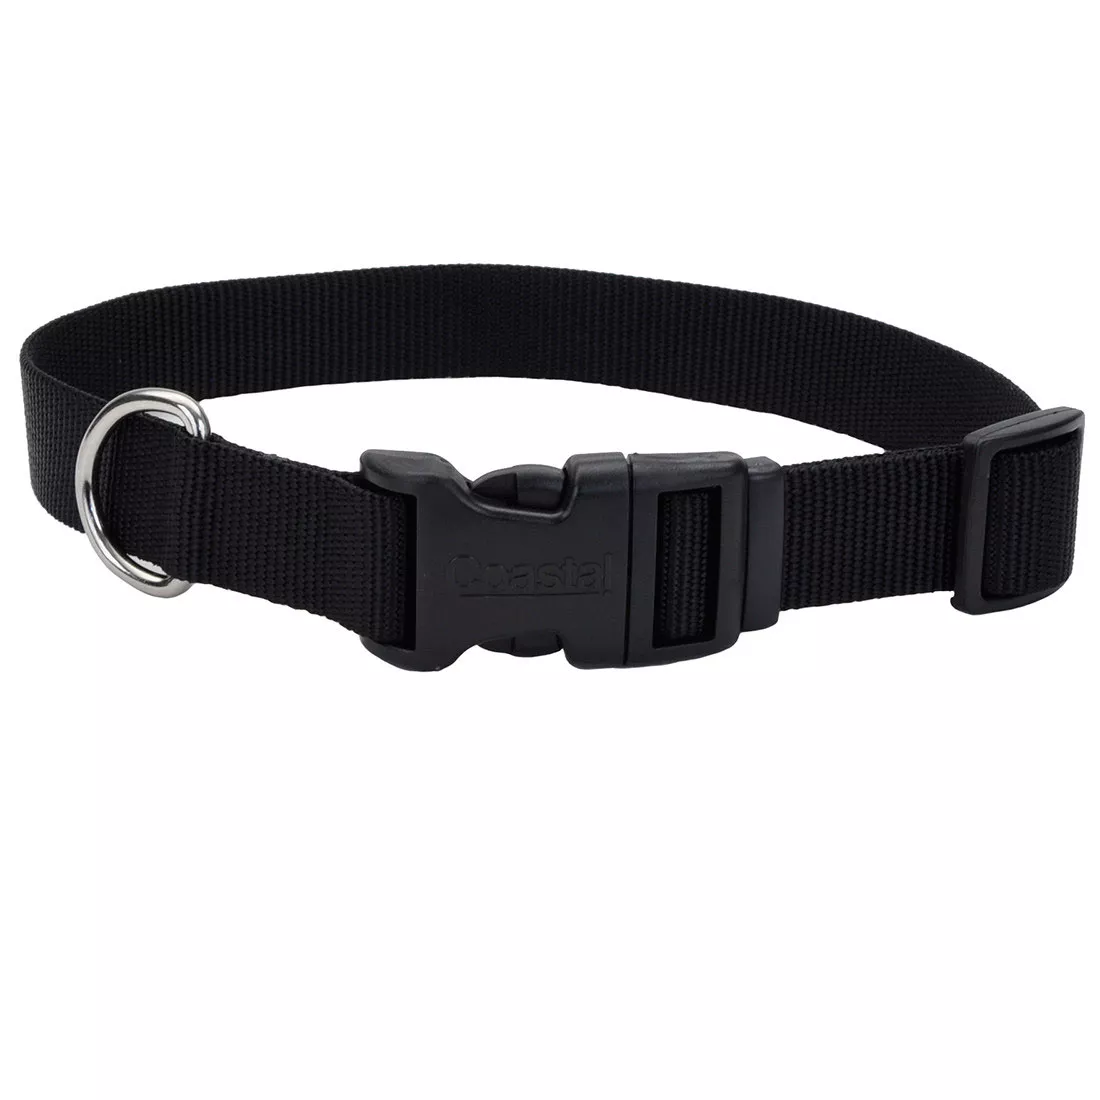 Cute & Super Safe Hardware Buckle Collar with Adorable Detachable